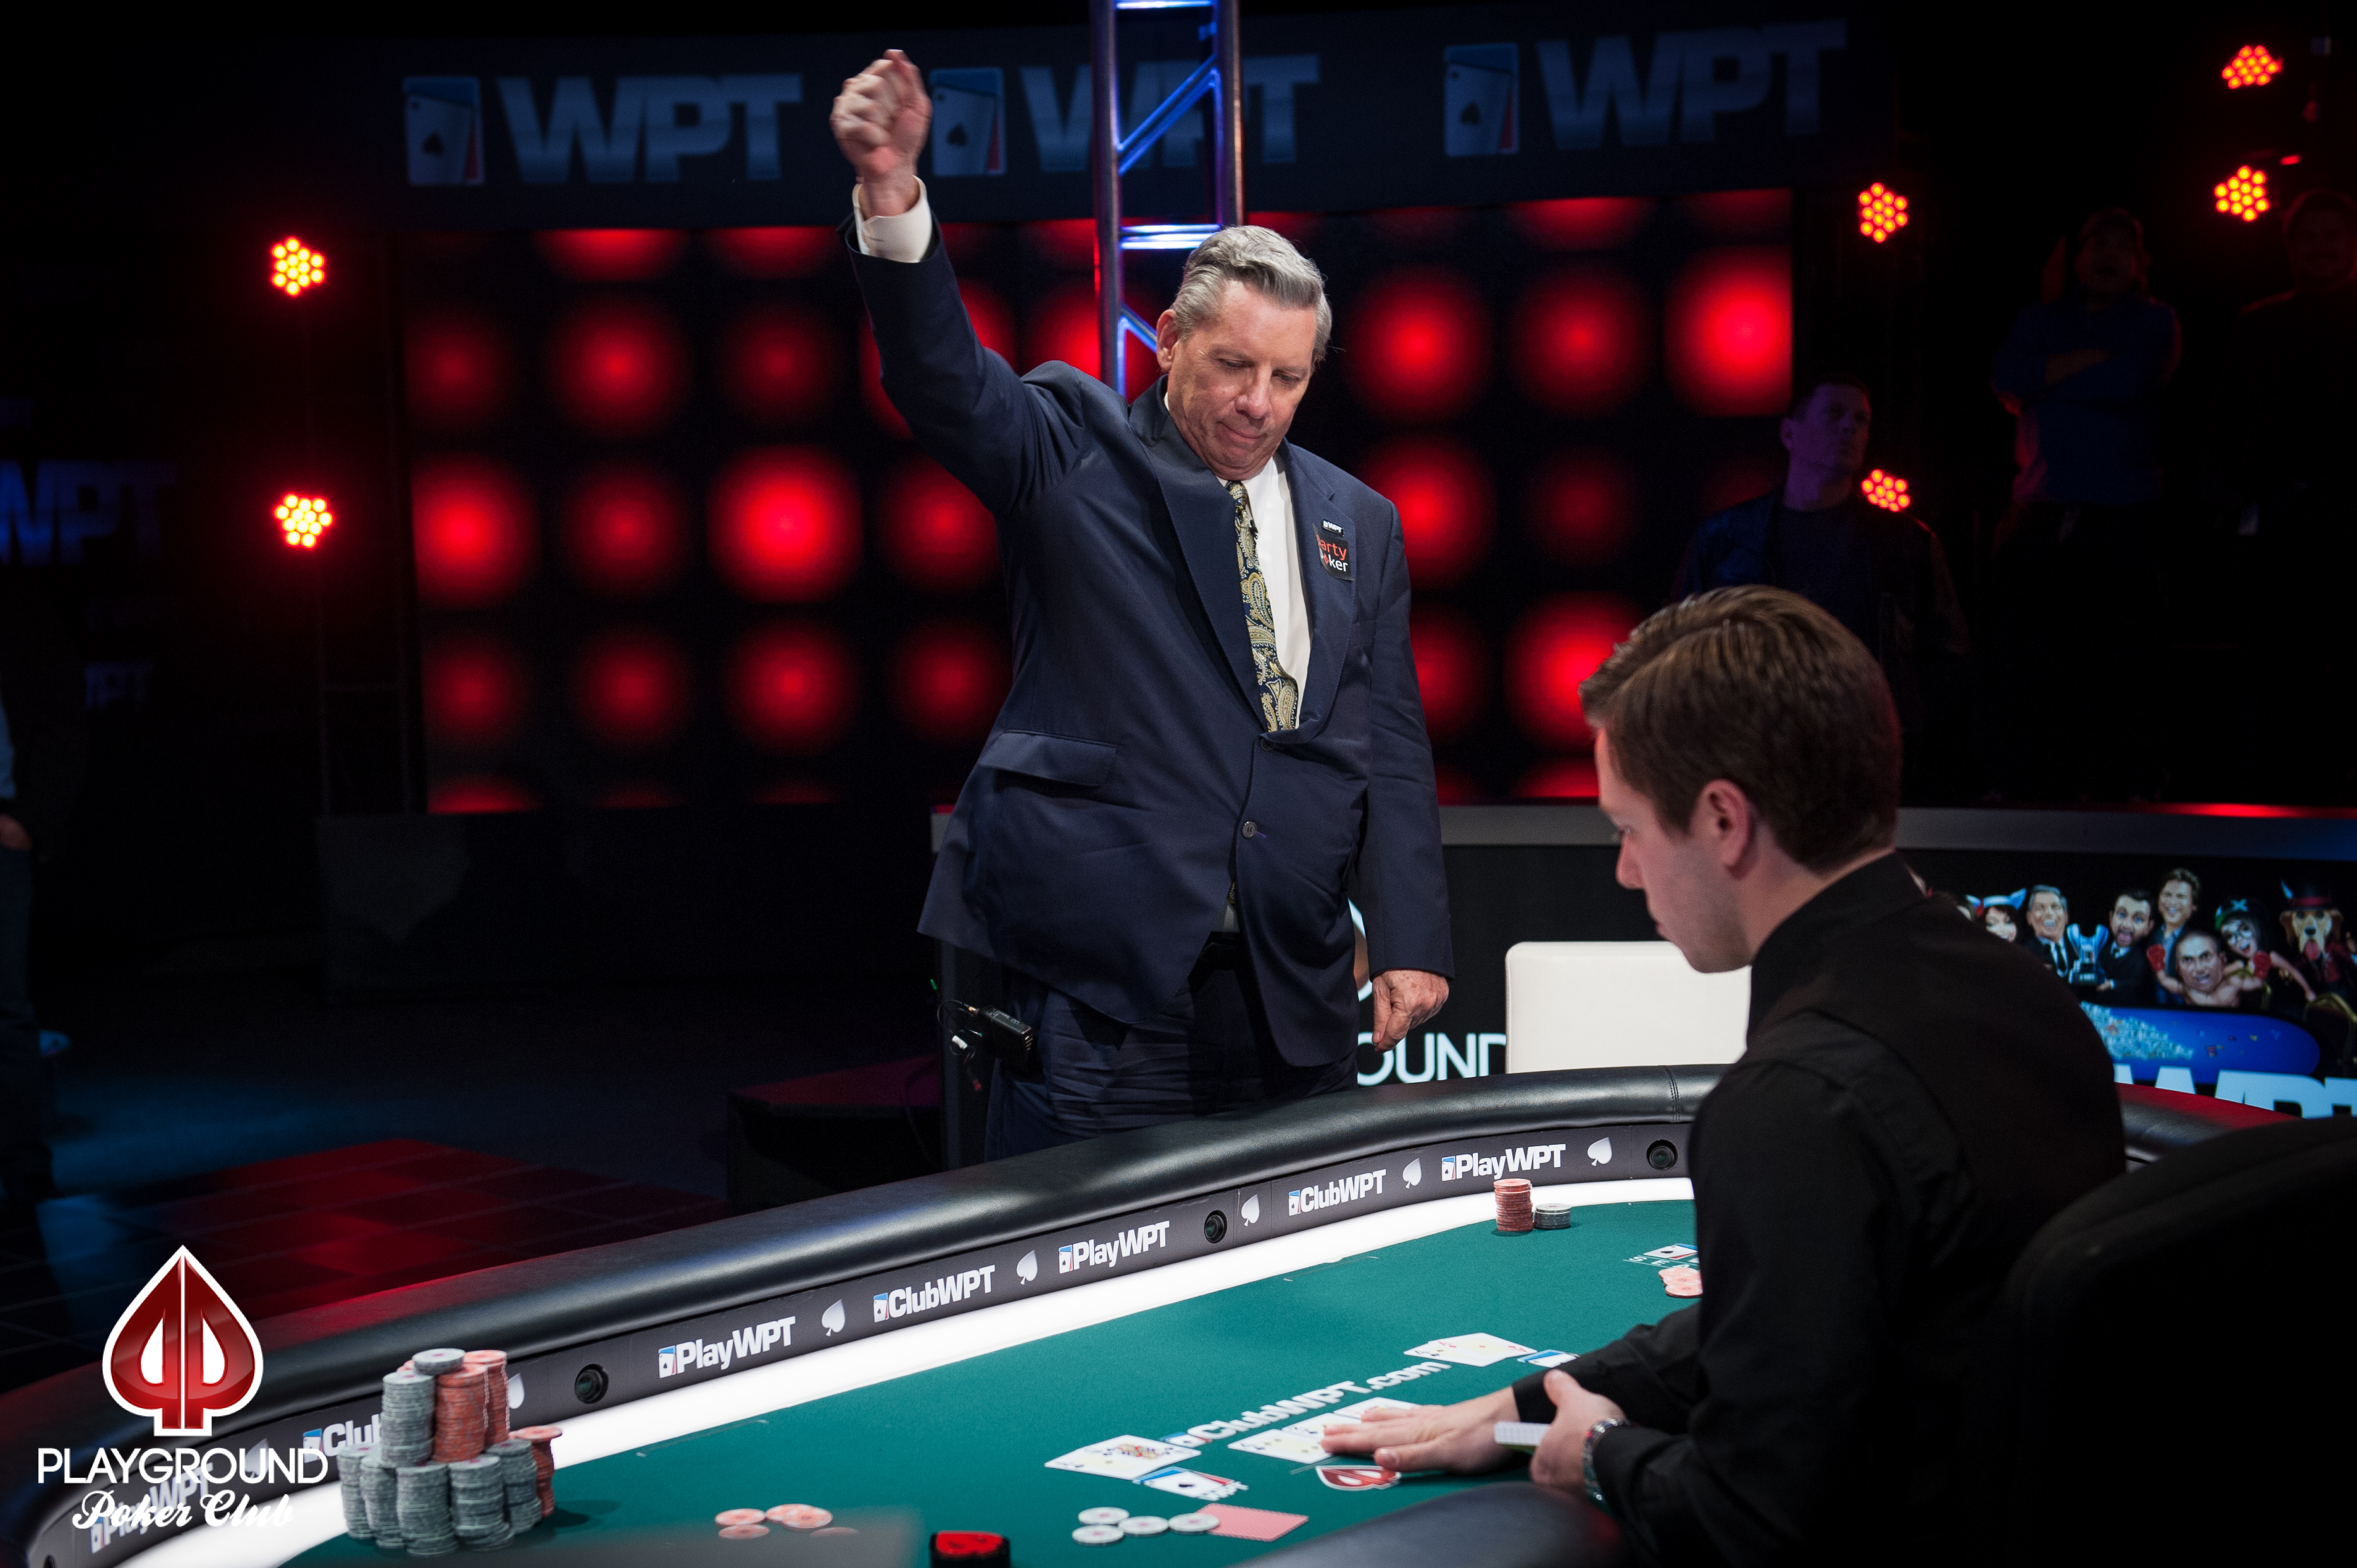 69-year-old Mike Sexton won his first WPT title